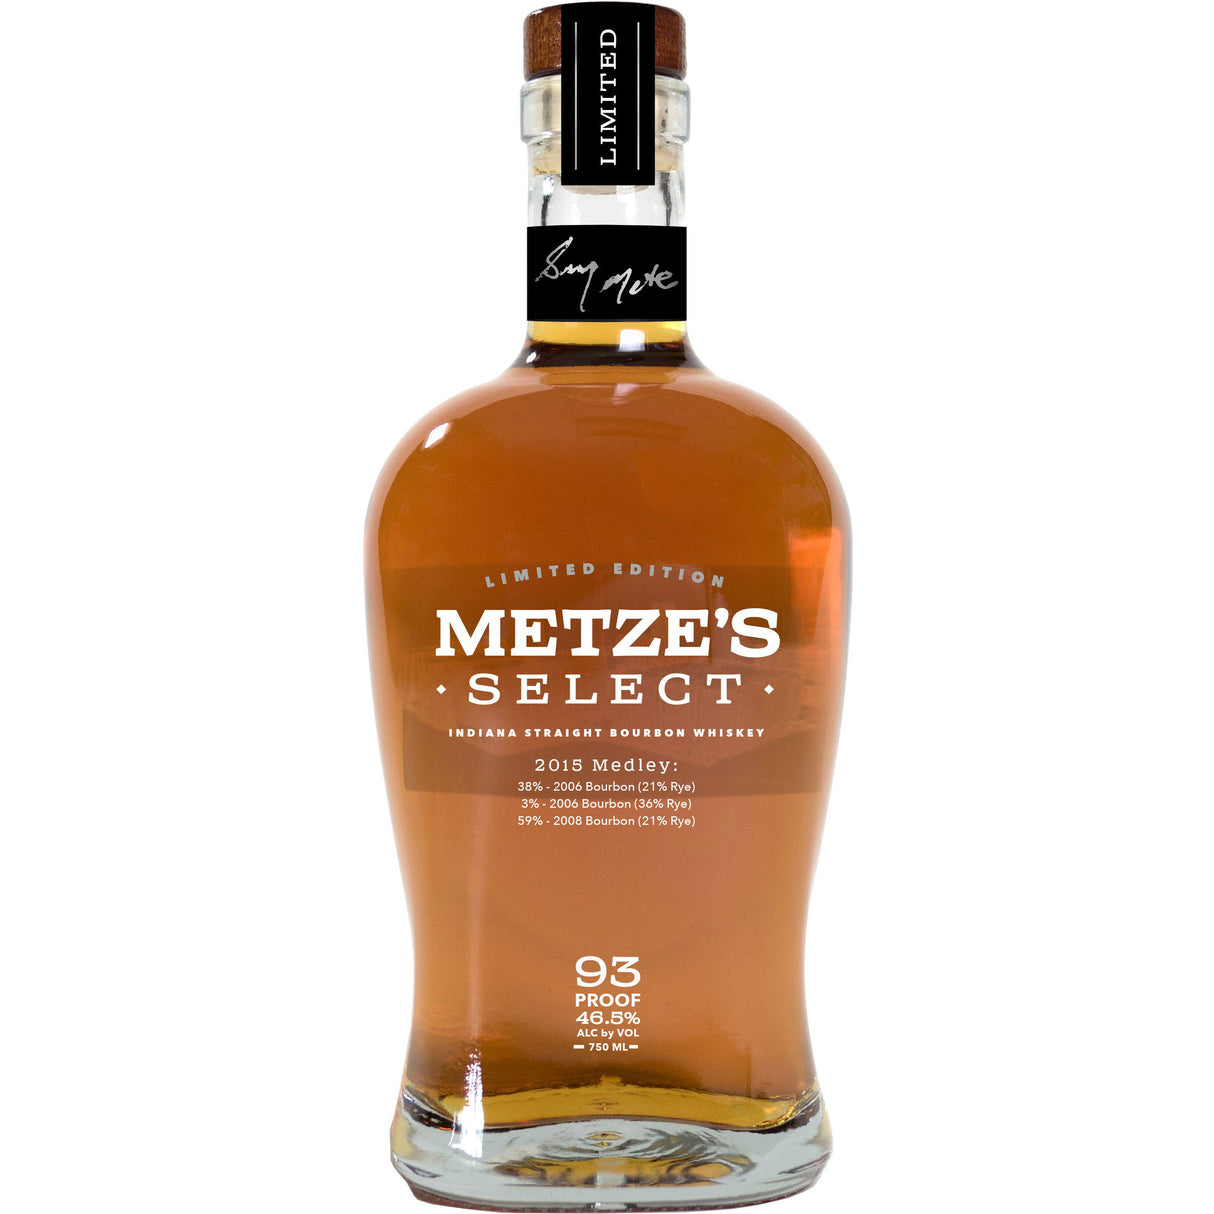 Metze's Select Limited Edition 2015 Indiana Straight Bourbon Whiskey - De Wine Spot | DWS - Drams/Whiskey, Wines, Sake